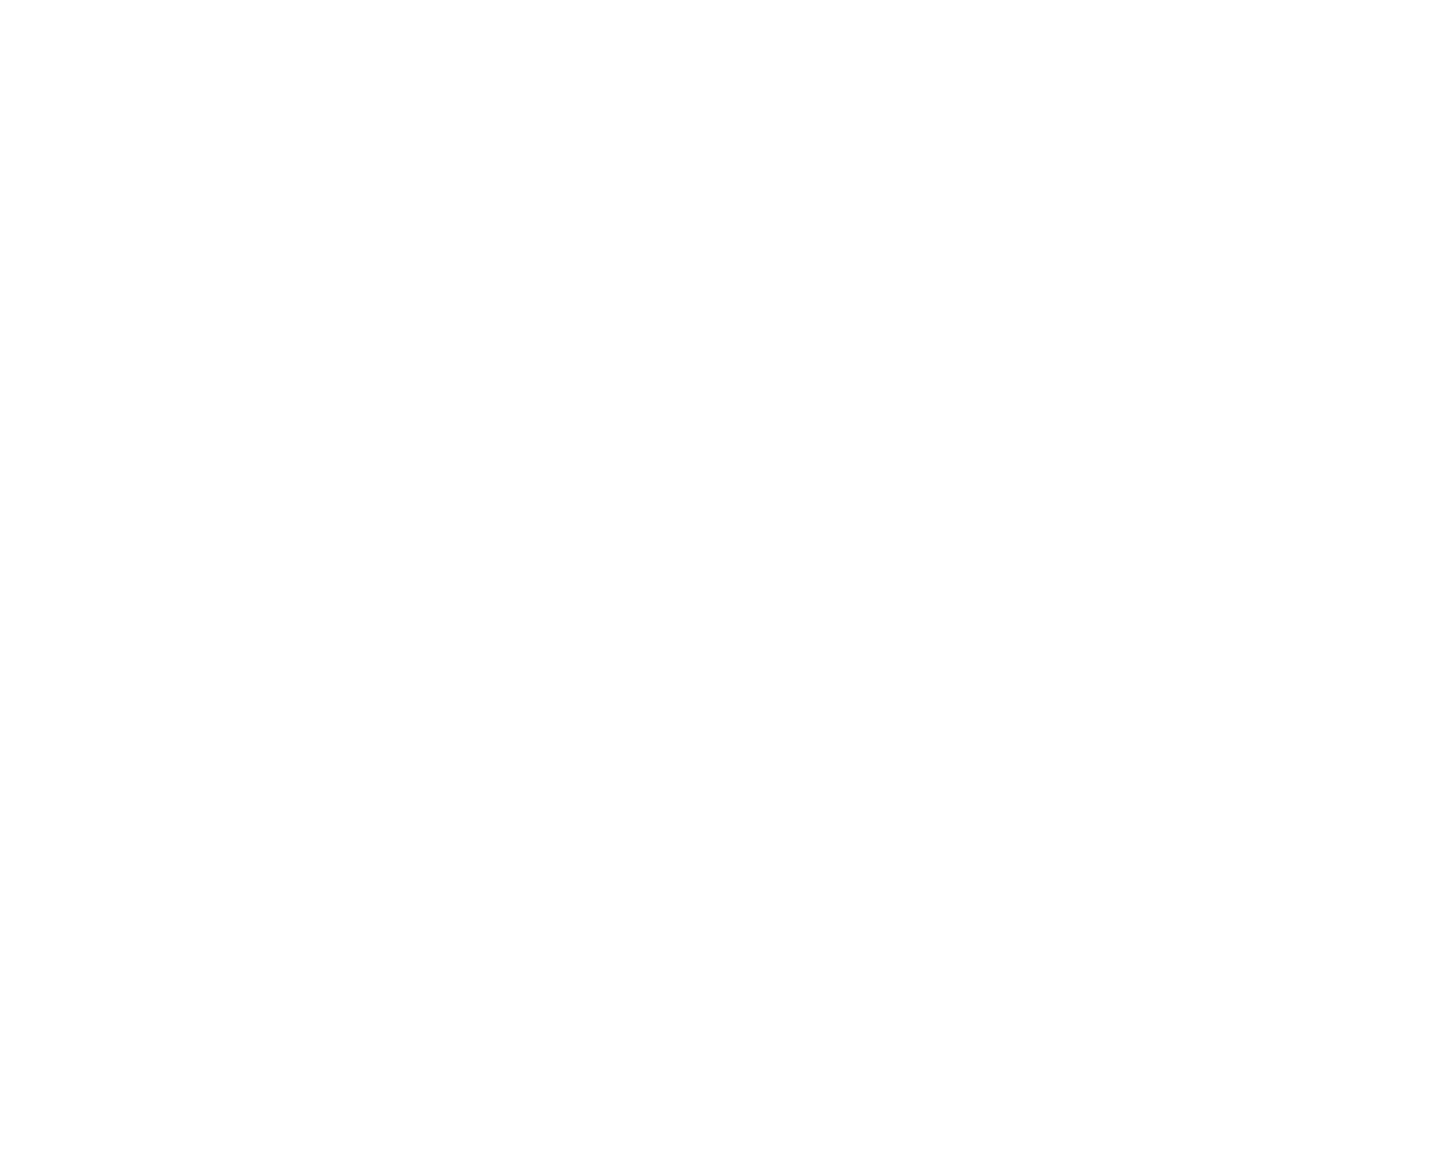 Kyrie Coaching by Ruthie Andrews